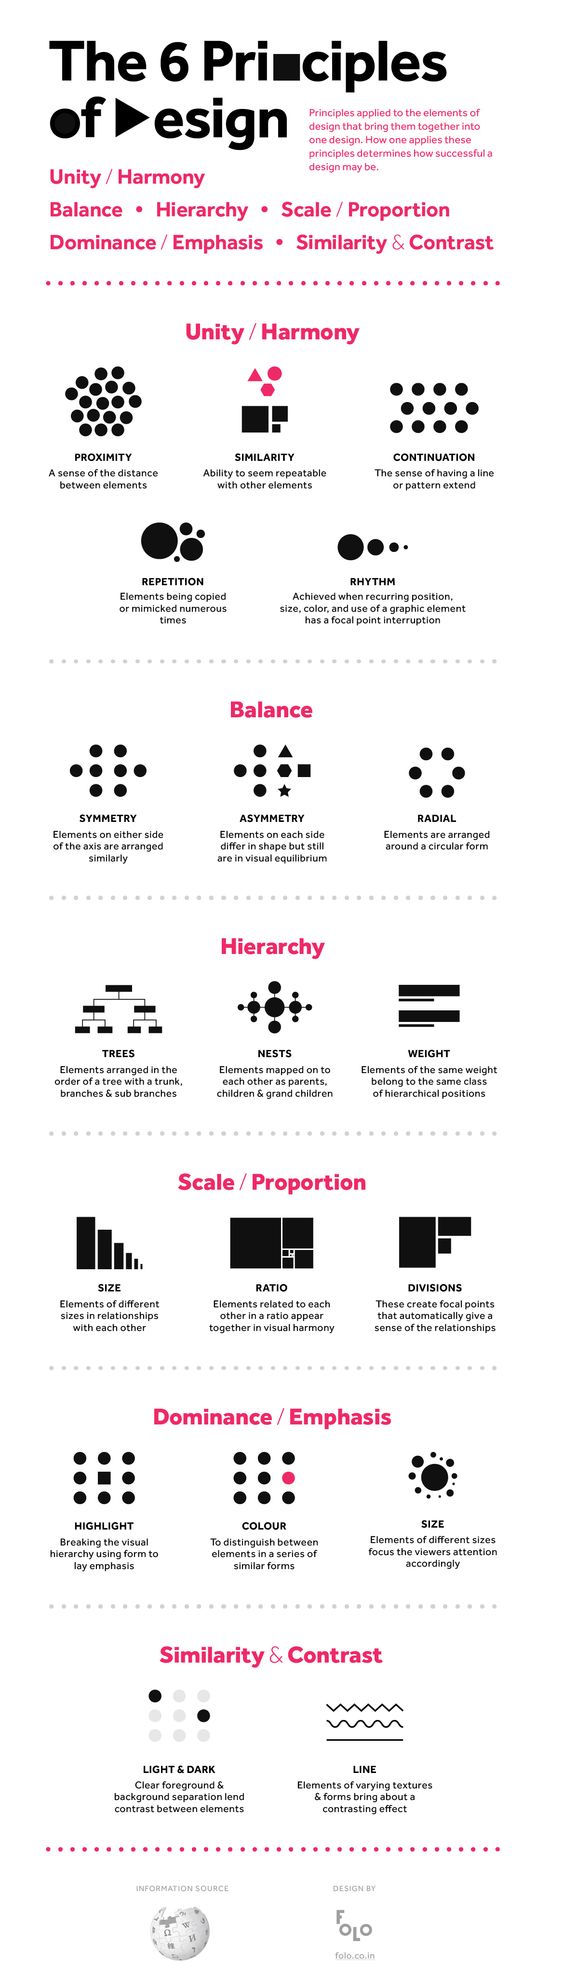 The 6 Principles of Design infographic. Some of these, like the unity/harmony ones, draw on gestalt visual principles.